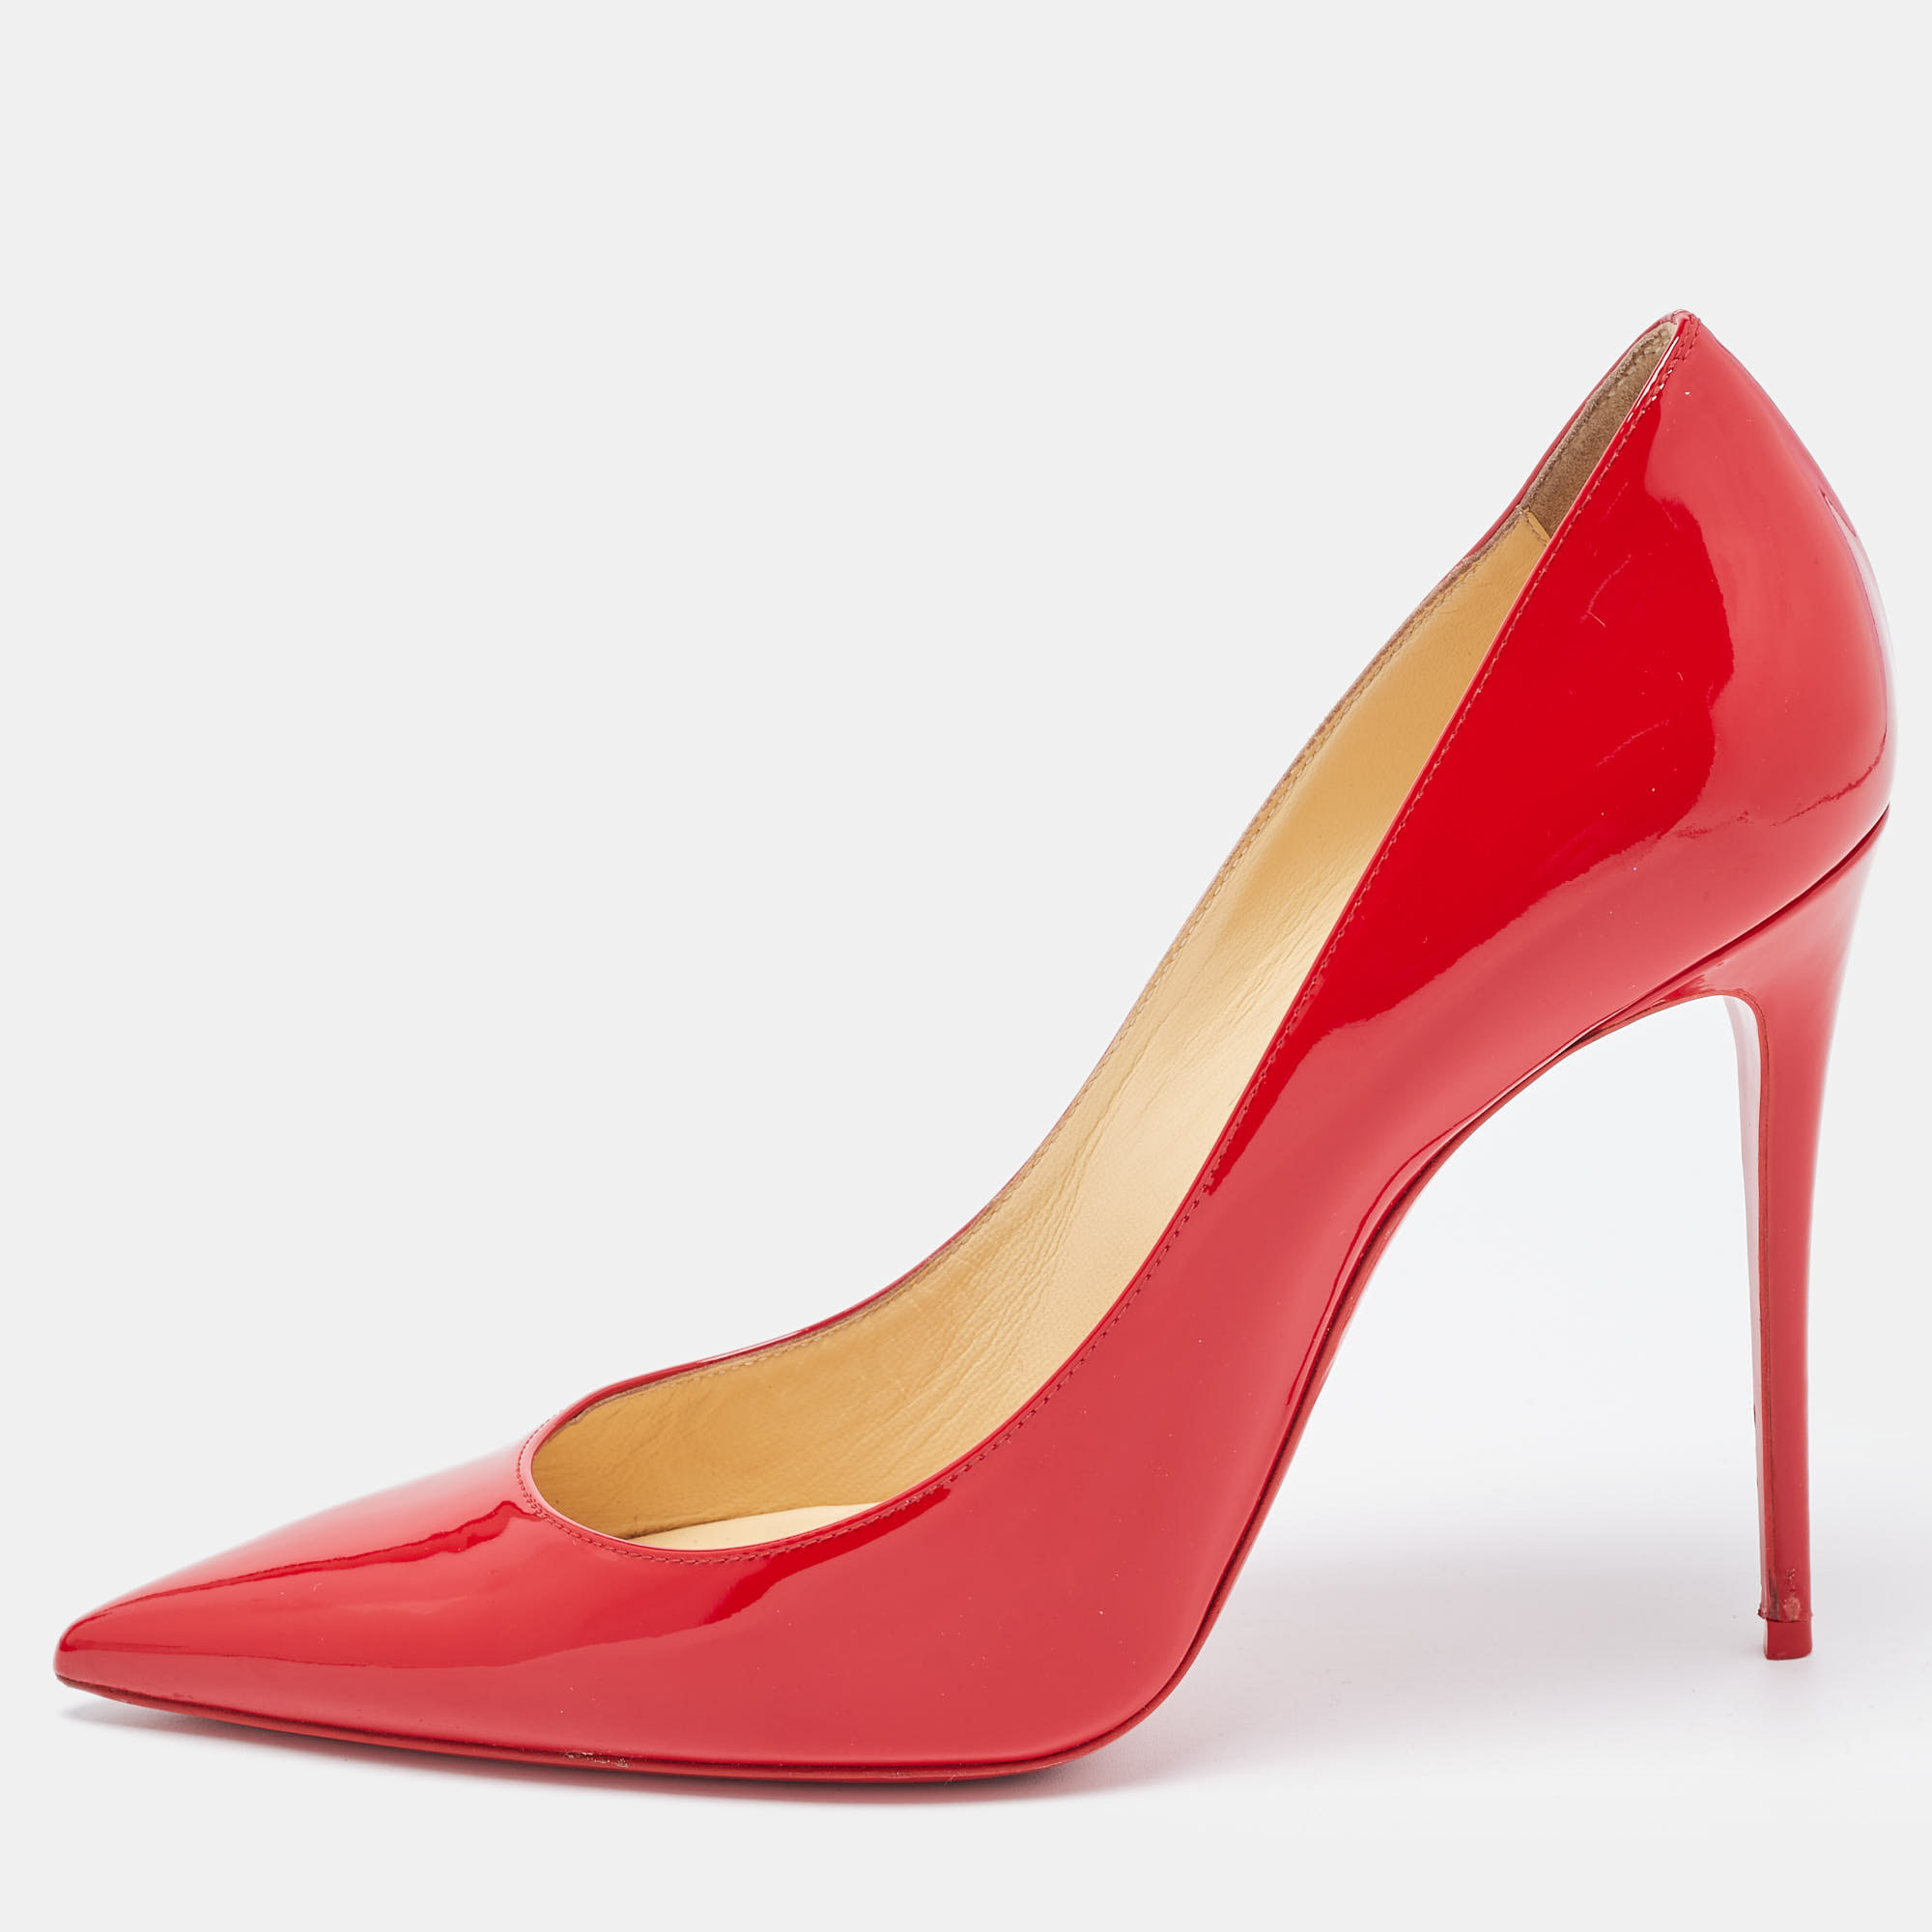 Christian Louboutin Red Patent Leather So Kate Pumps Size 41